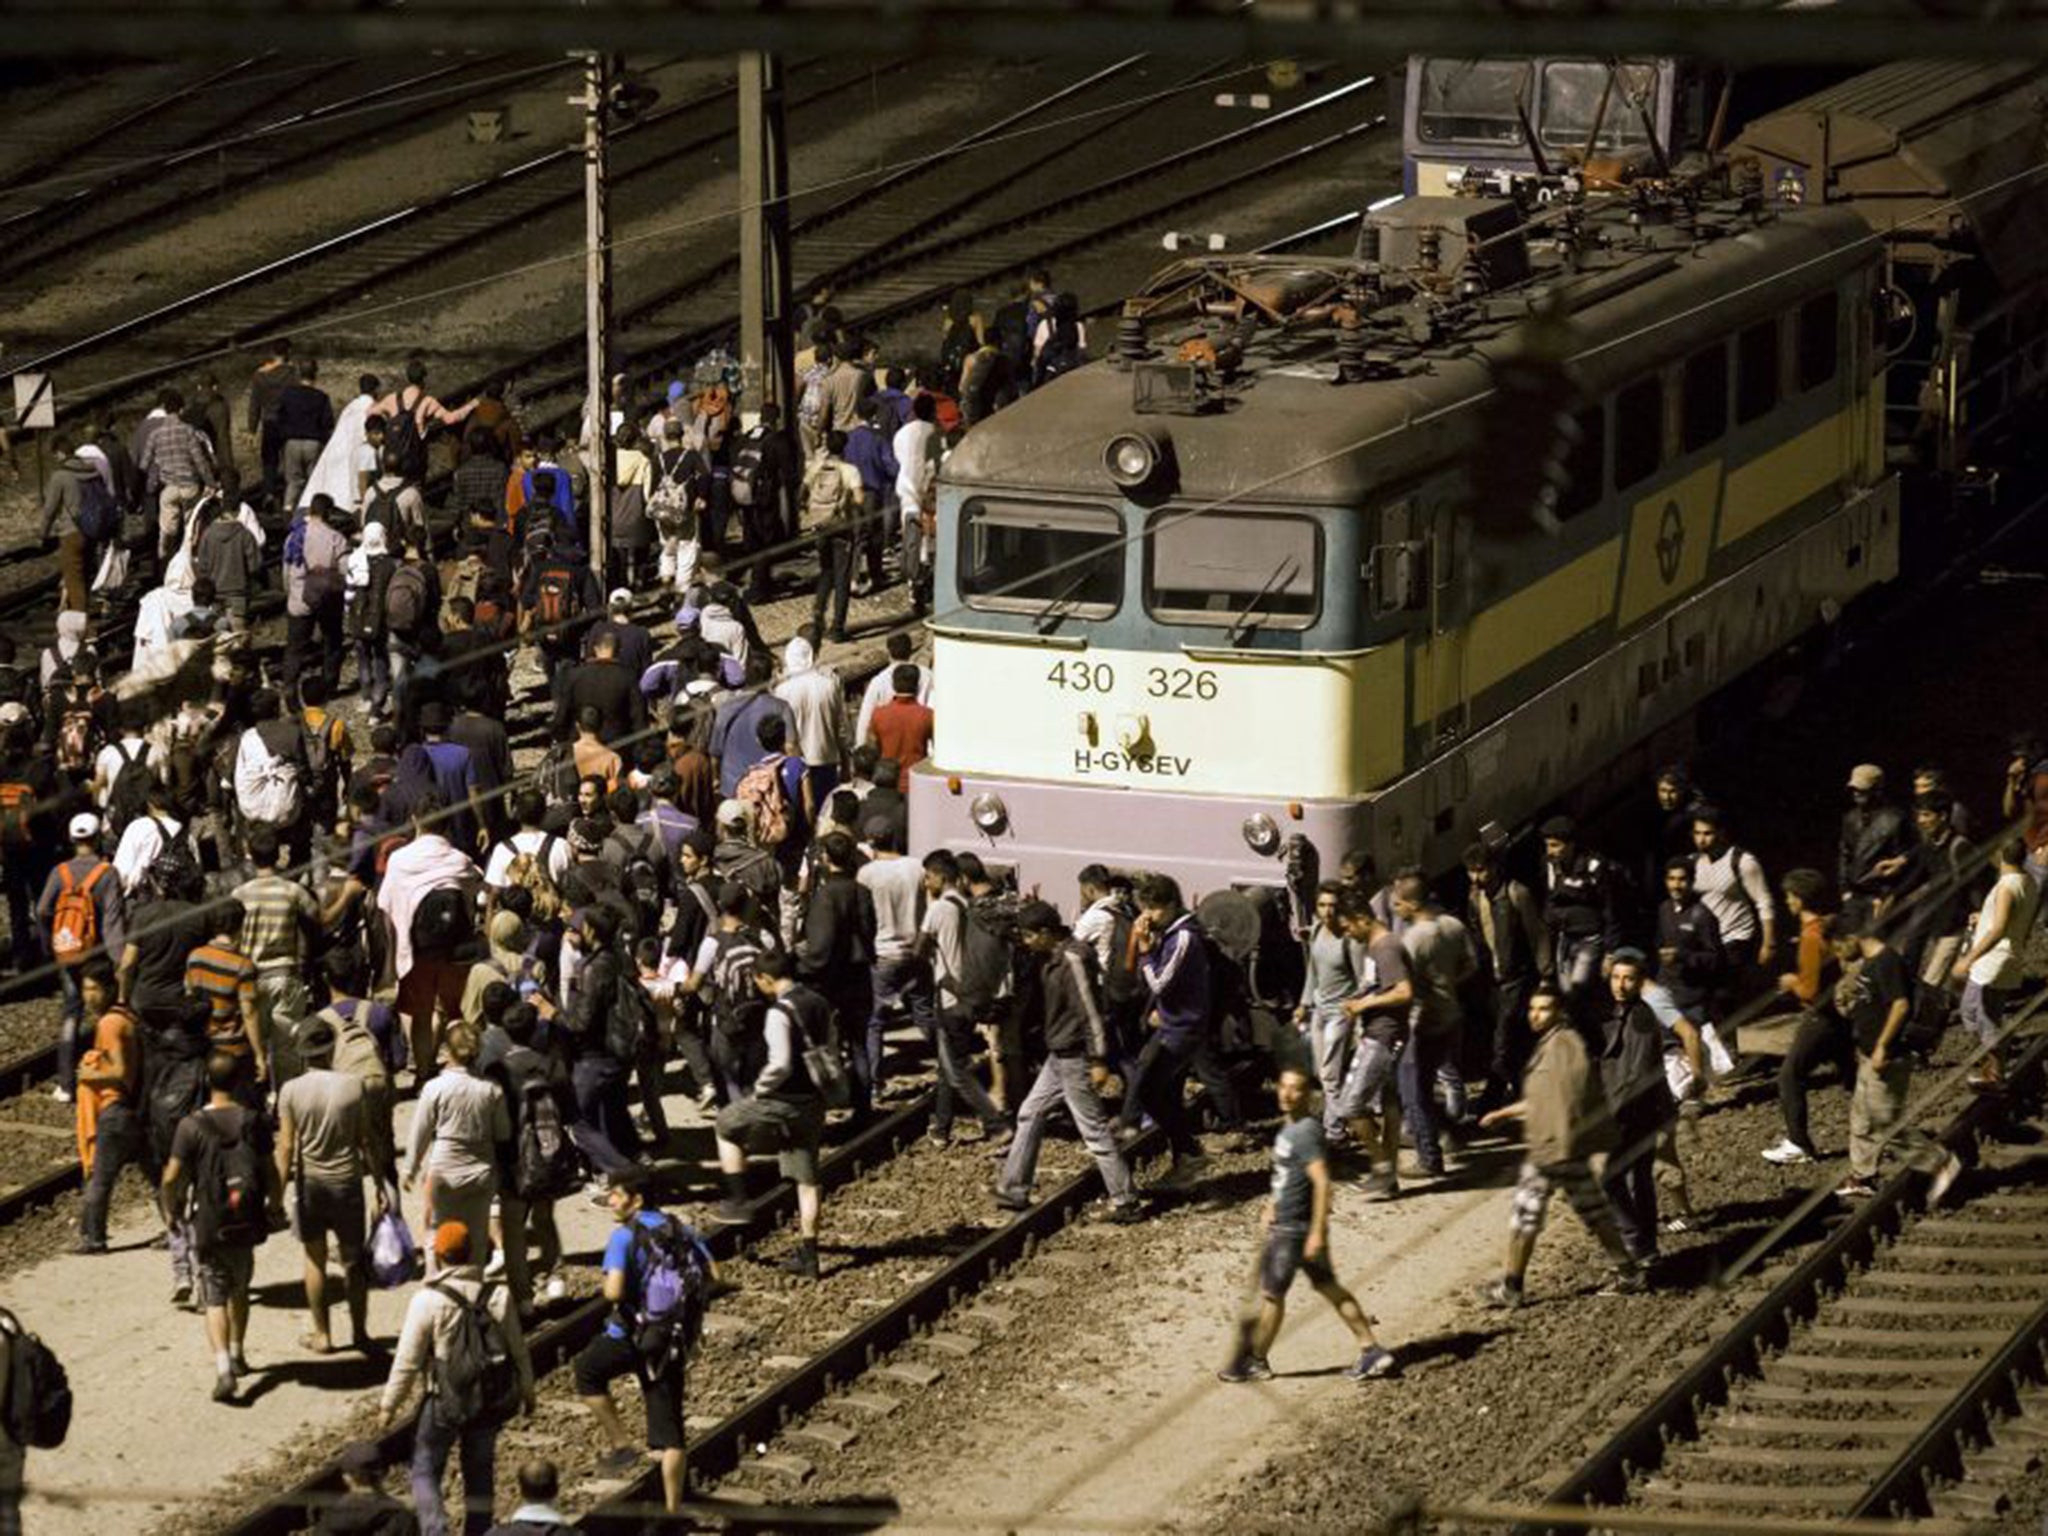 Refugees flood across the tracks at the Tatabanya Railway Station near Budapest in Hungary on their way to Austria 